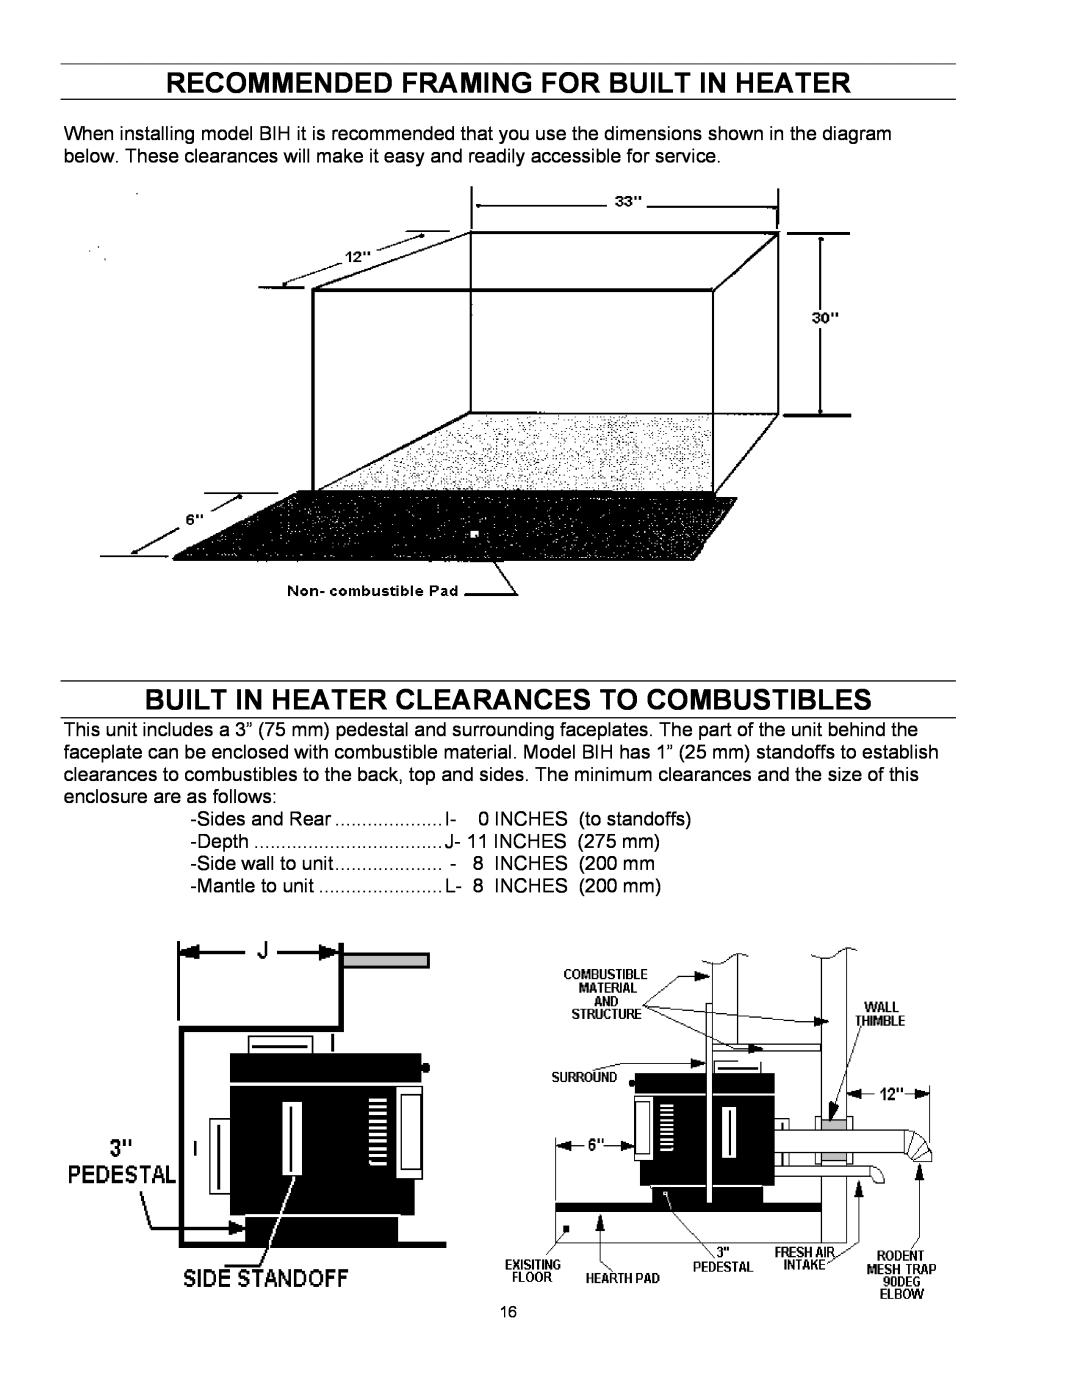 Enviro EF-II I technical manual Recommended Framing For Built In Heater, Built In Heater Clearances To Combustibles 